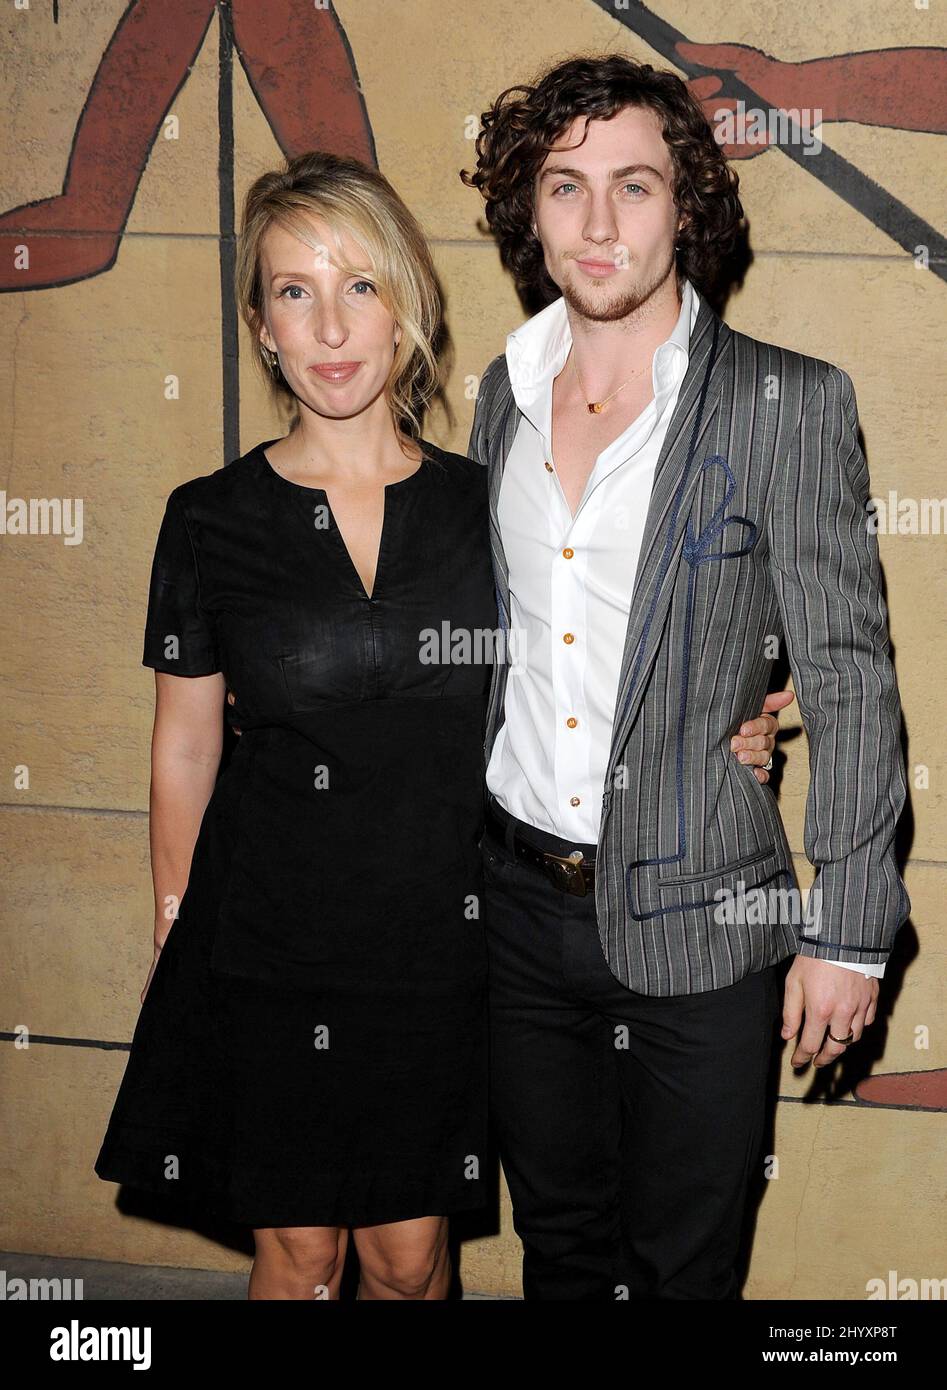 Sam Taylor-Wood and Aaron Johnson attend the 'Nowhere Boy' screening held at the Egyptian Theatre in Hollywood, CA. Stock Photo